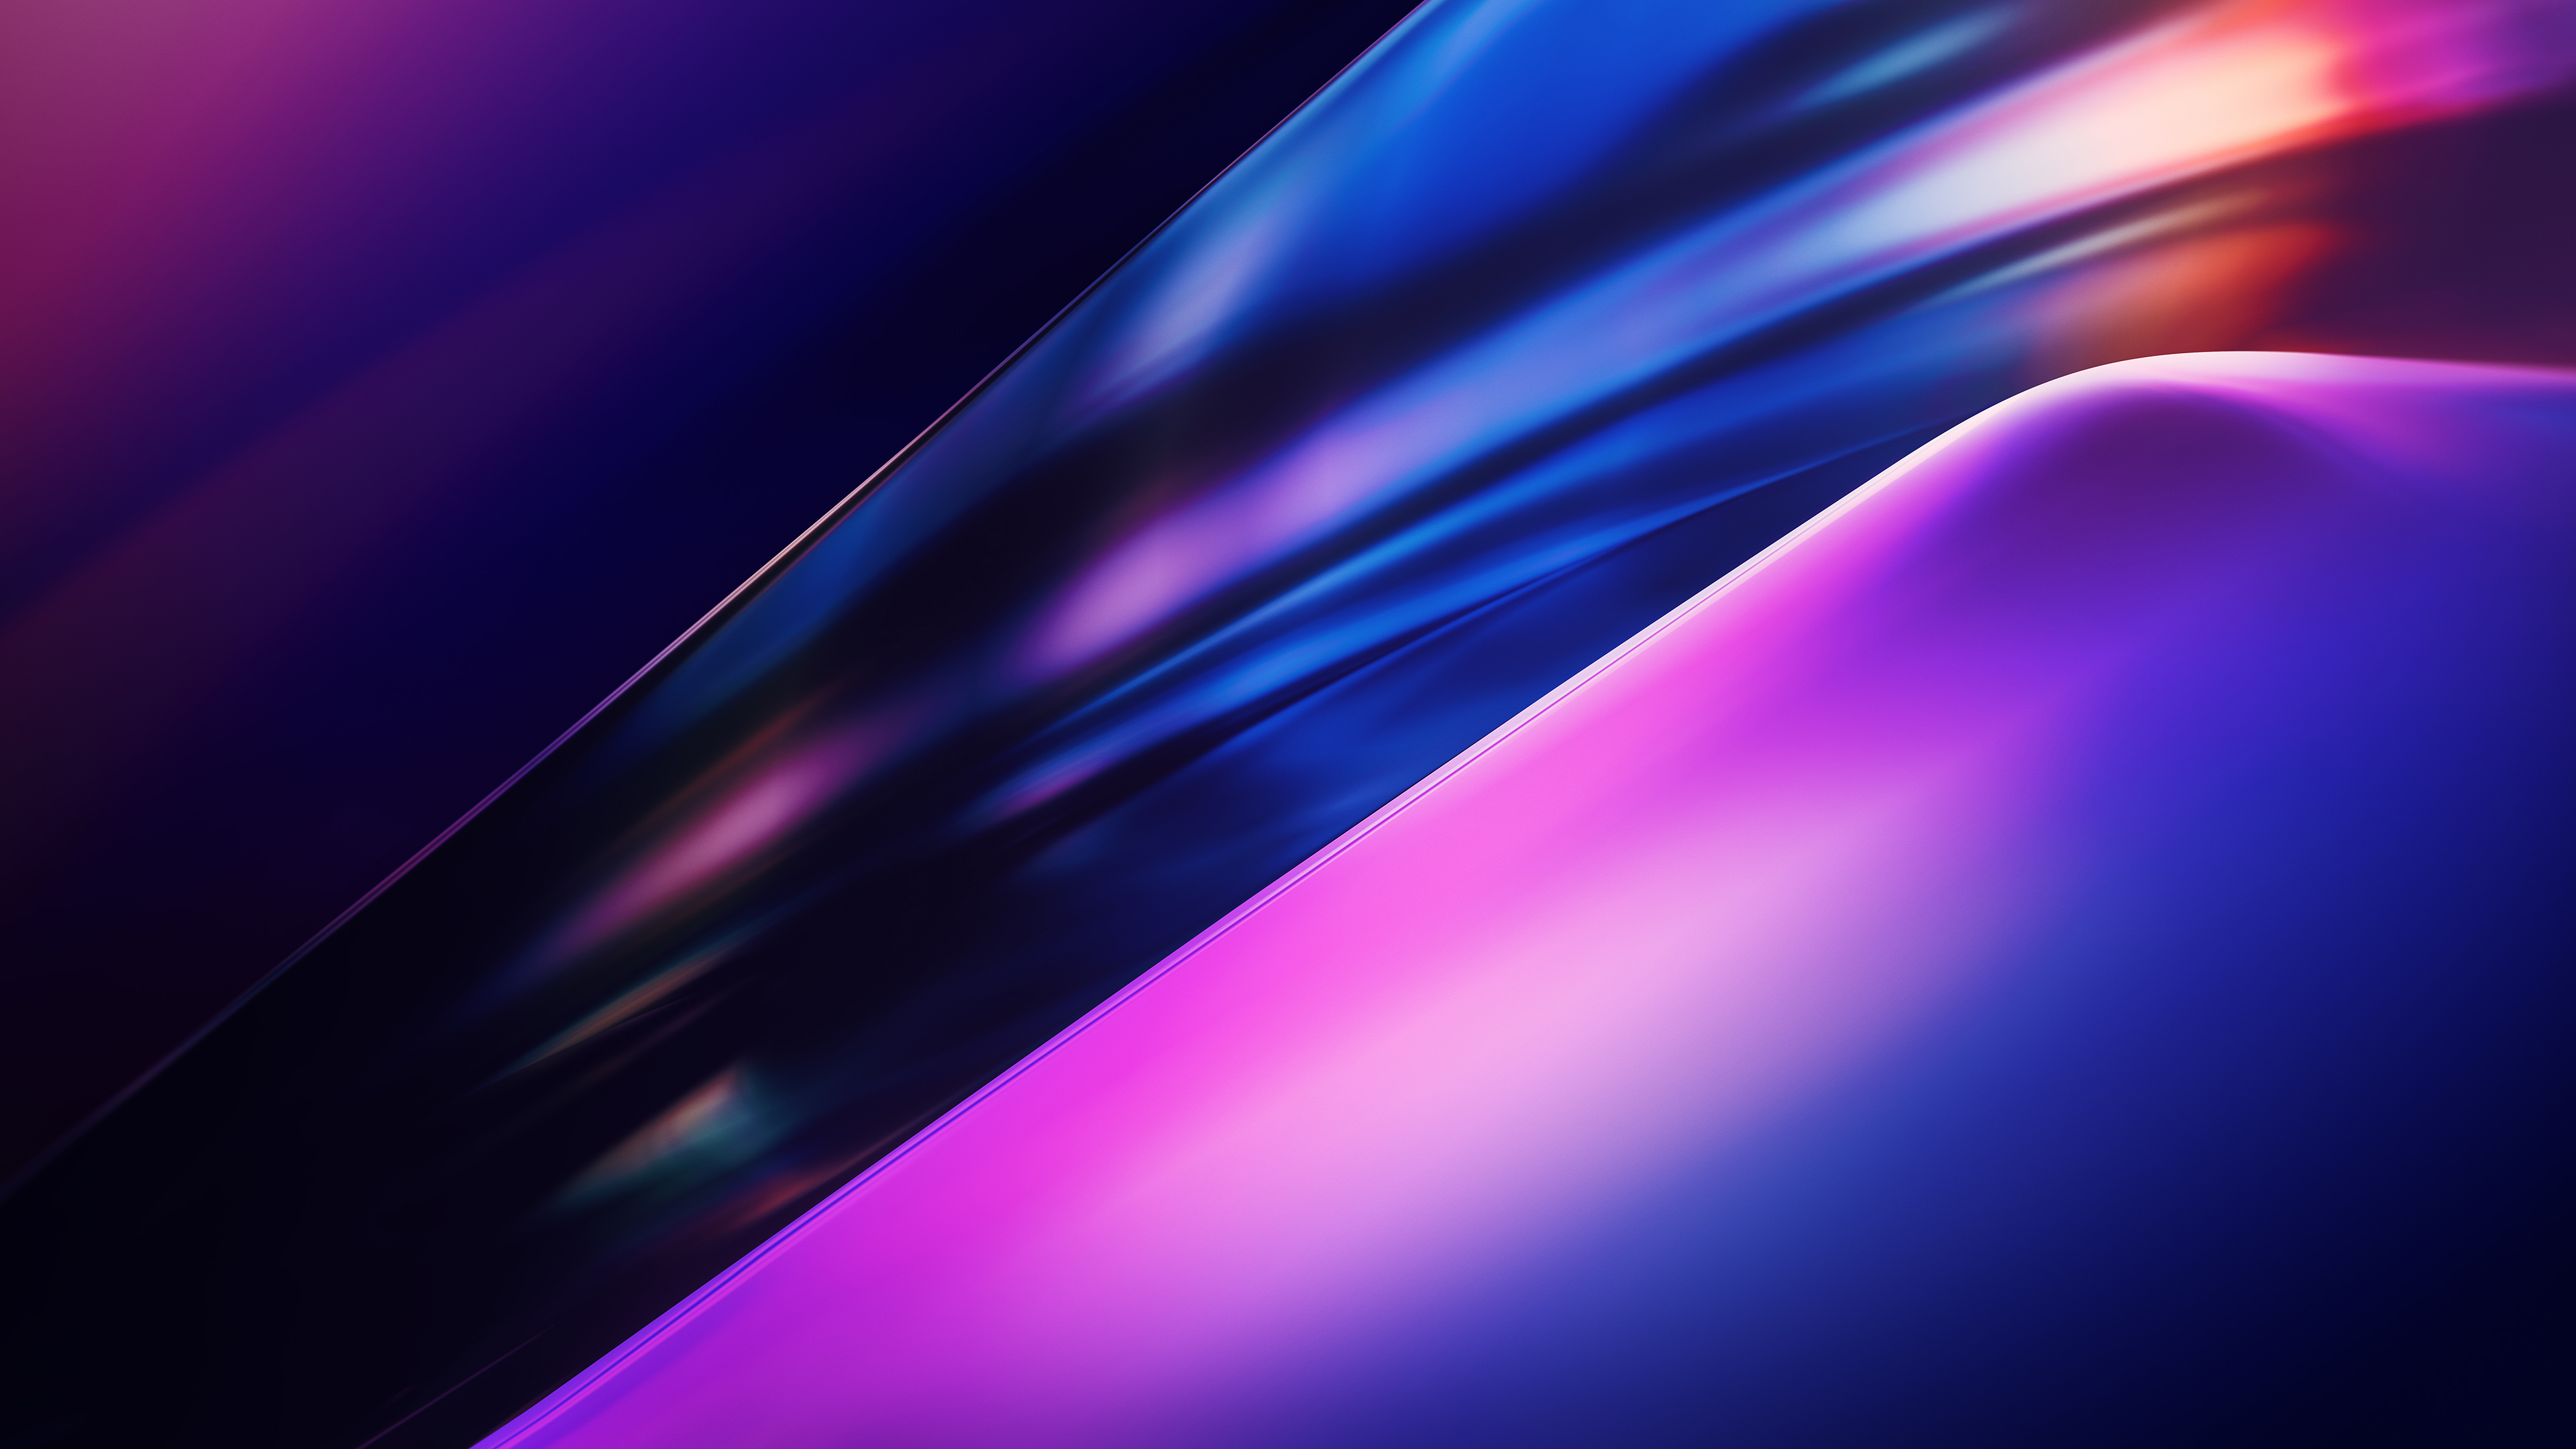 HD abstract wallpapers | Peakpx